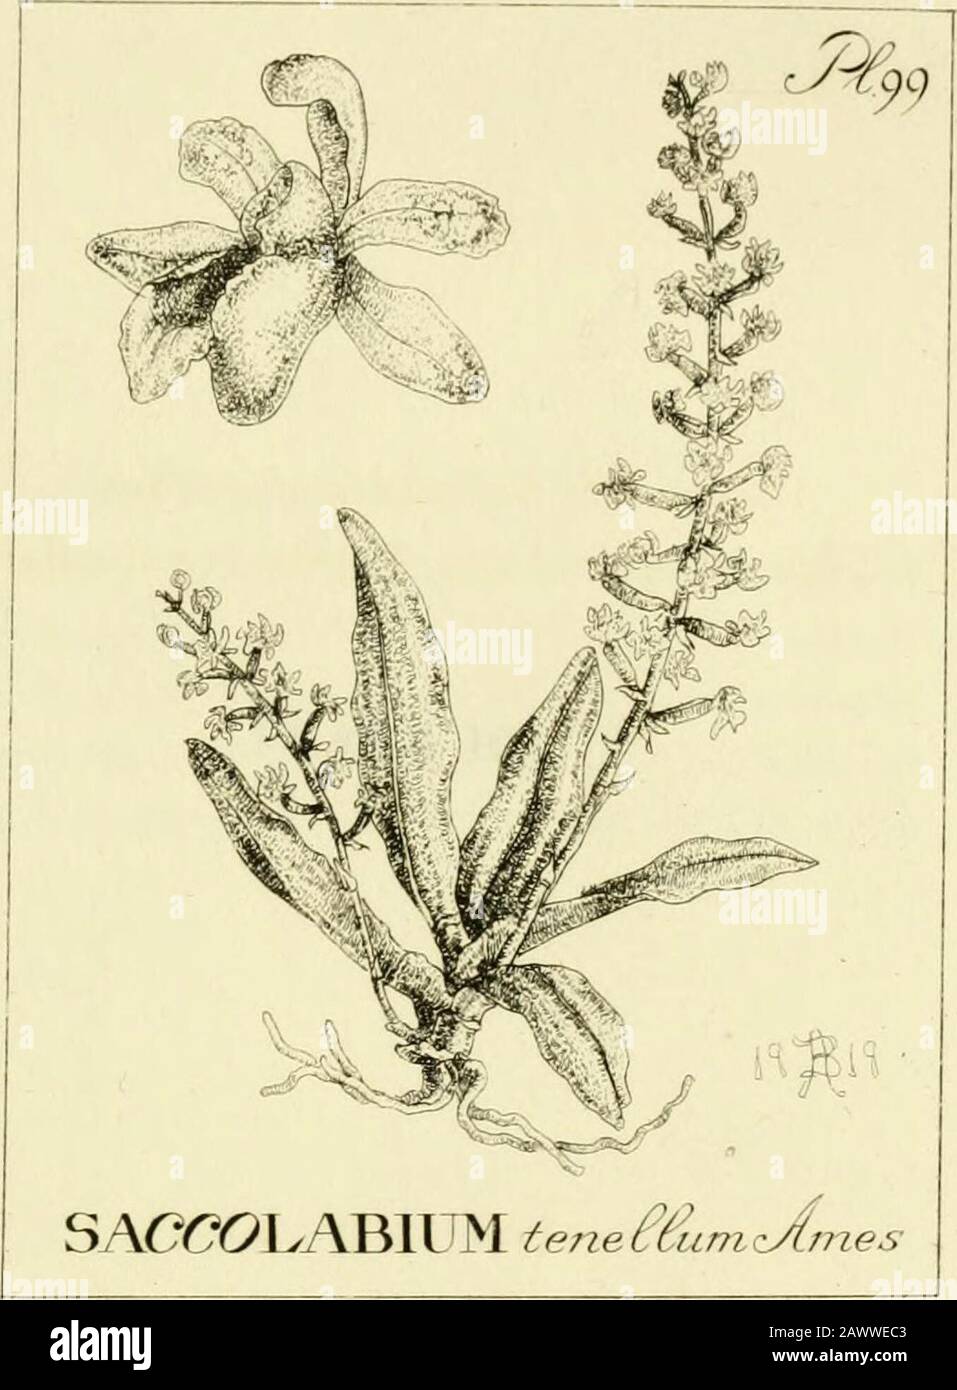 Orchidaceae: illustrations and studies of the family Orchidaceae . PLATE 99 ORCHIDACE.E Plate 99 : Saccolabium tenellumPlant, drawn natural size. Flower much enlarged. [ 314 ]. PLATE 100 ORCHIDACEiE Plate 100: Philippinaea WenzeliiI. Plant reduced one half. II. Inflorescence nat-ural size. 1, labellum and gynostemium, poUiniaremoved. 2, labellum and gynostemium, polliniain position. 3, pollinia. 4, labellum sac open toshow clavate processes on the lateral wall. [ 316 1 PHII.IPFINAEA Stock Photo